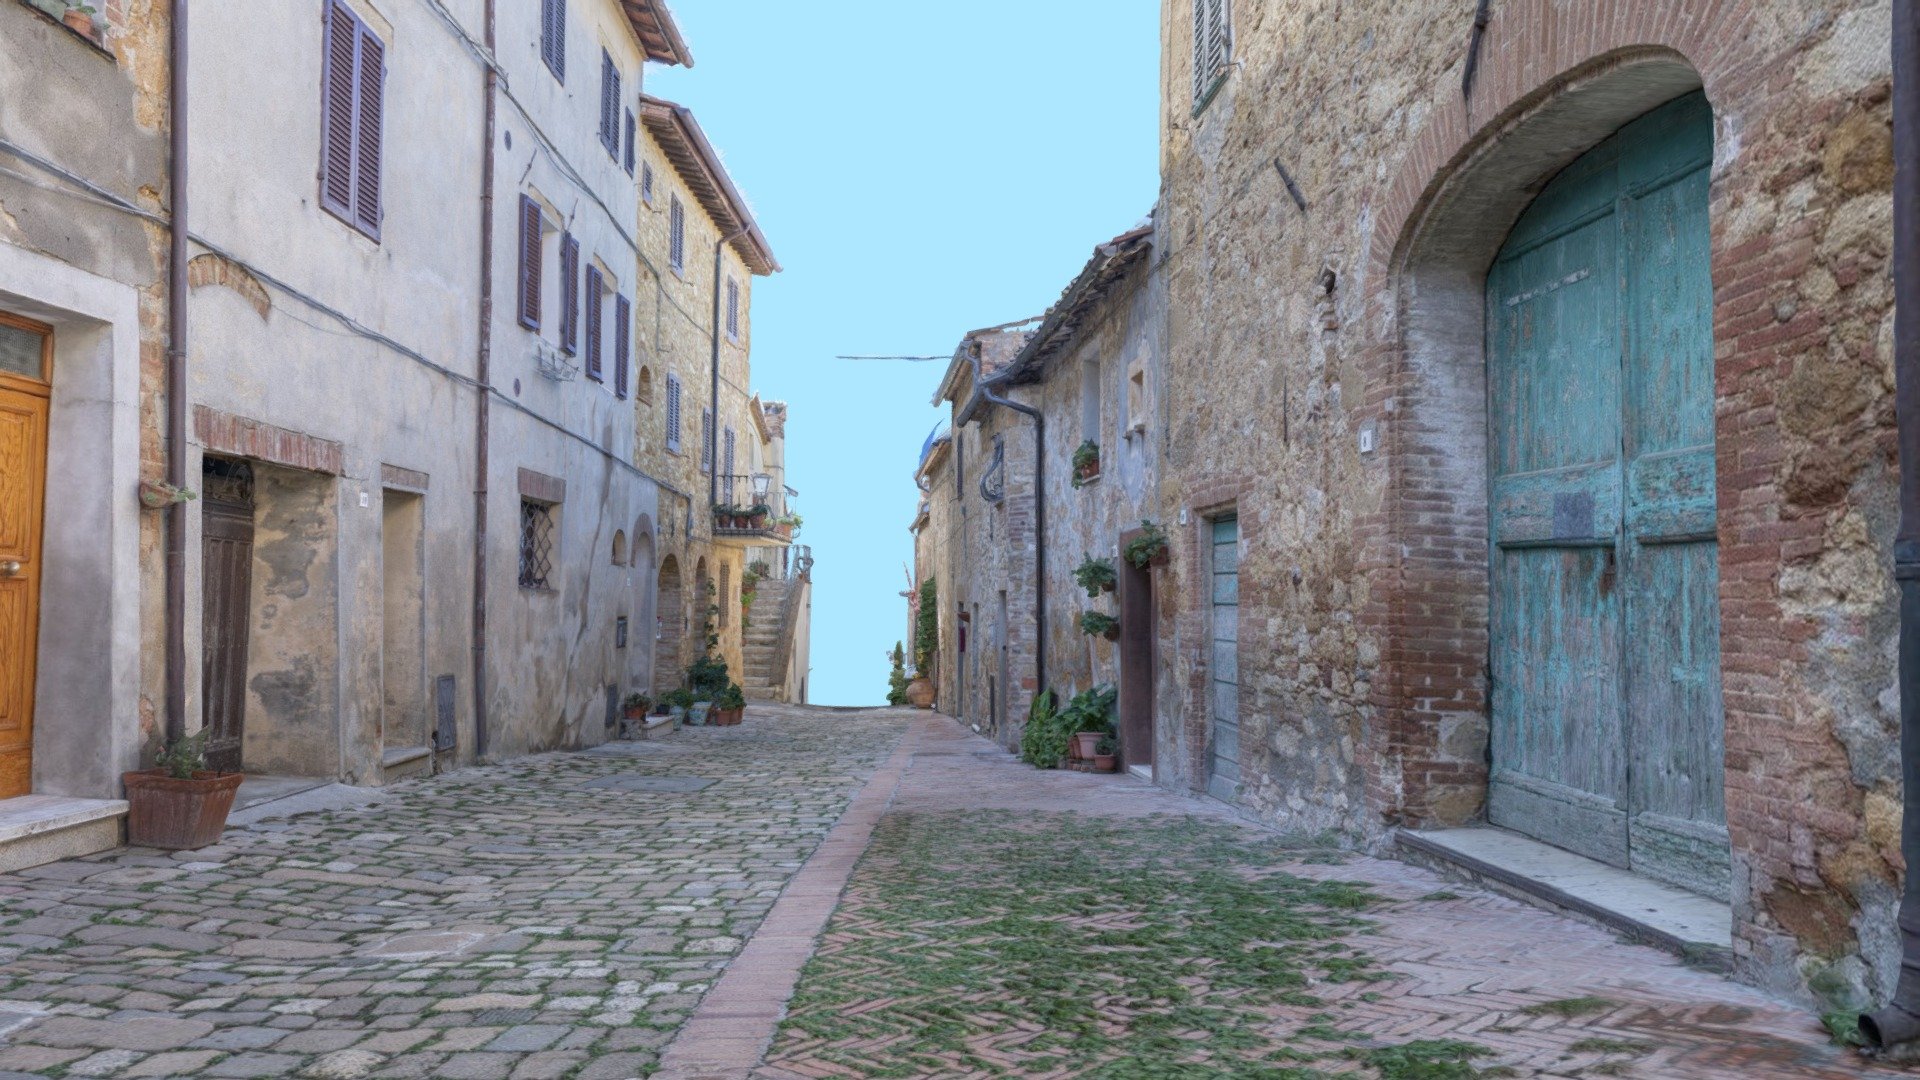 Pienza is a town and comune in the province of Siena, Tuscany, in the historical region of Val d'Orcia. Situated between the towns of Montepulciano and Montalcino, it is considered the &ldquo;touchstone of Renaissance urbanism